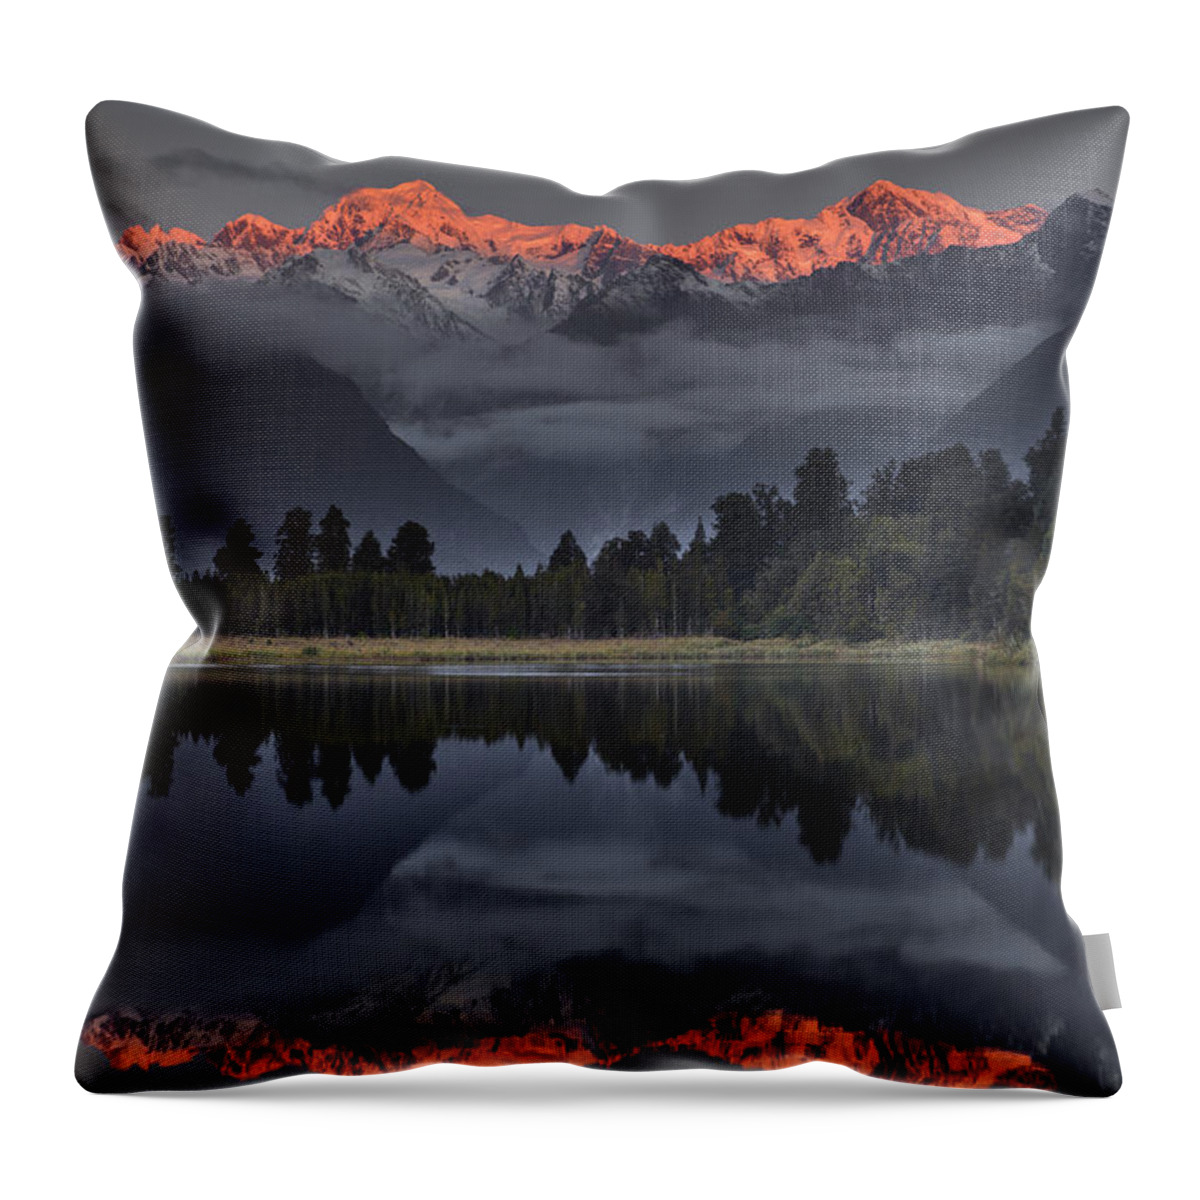 00462453 Throw Pillow featuring the photograph Sunset Reflection Of Lake Matheson by Colin Monteath